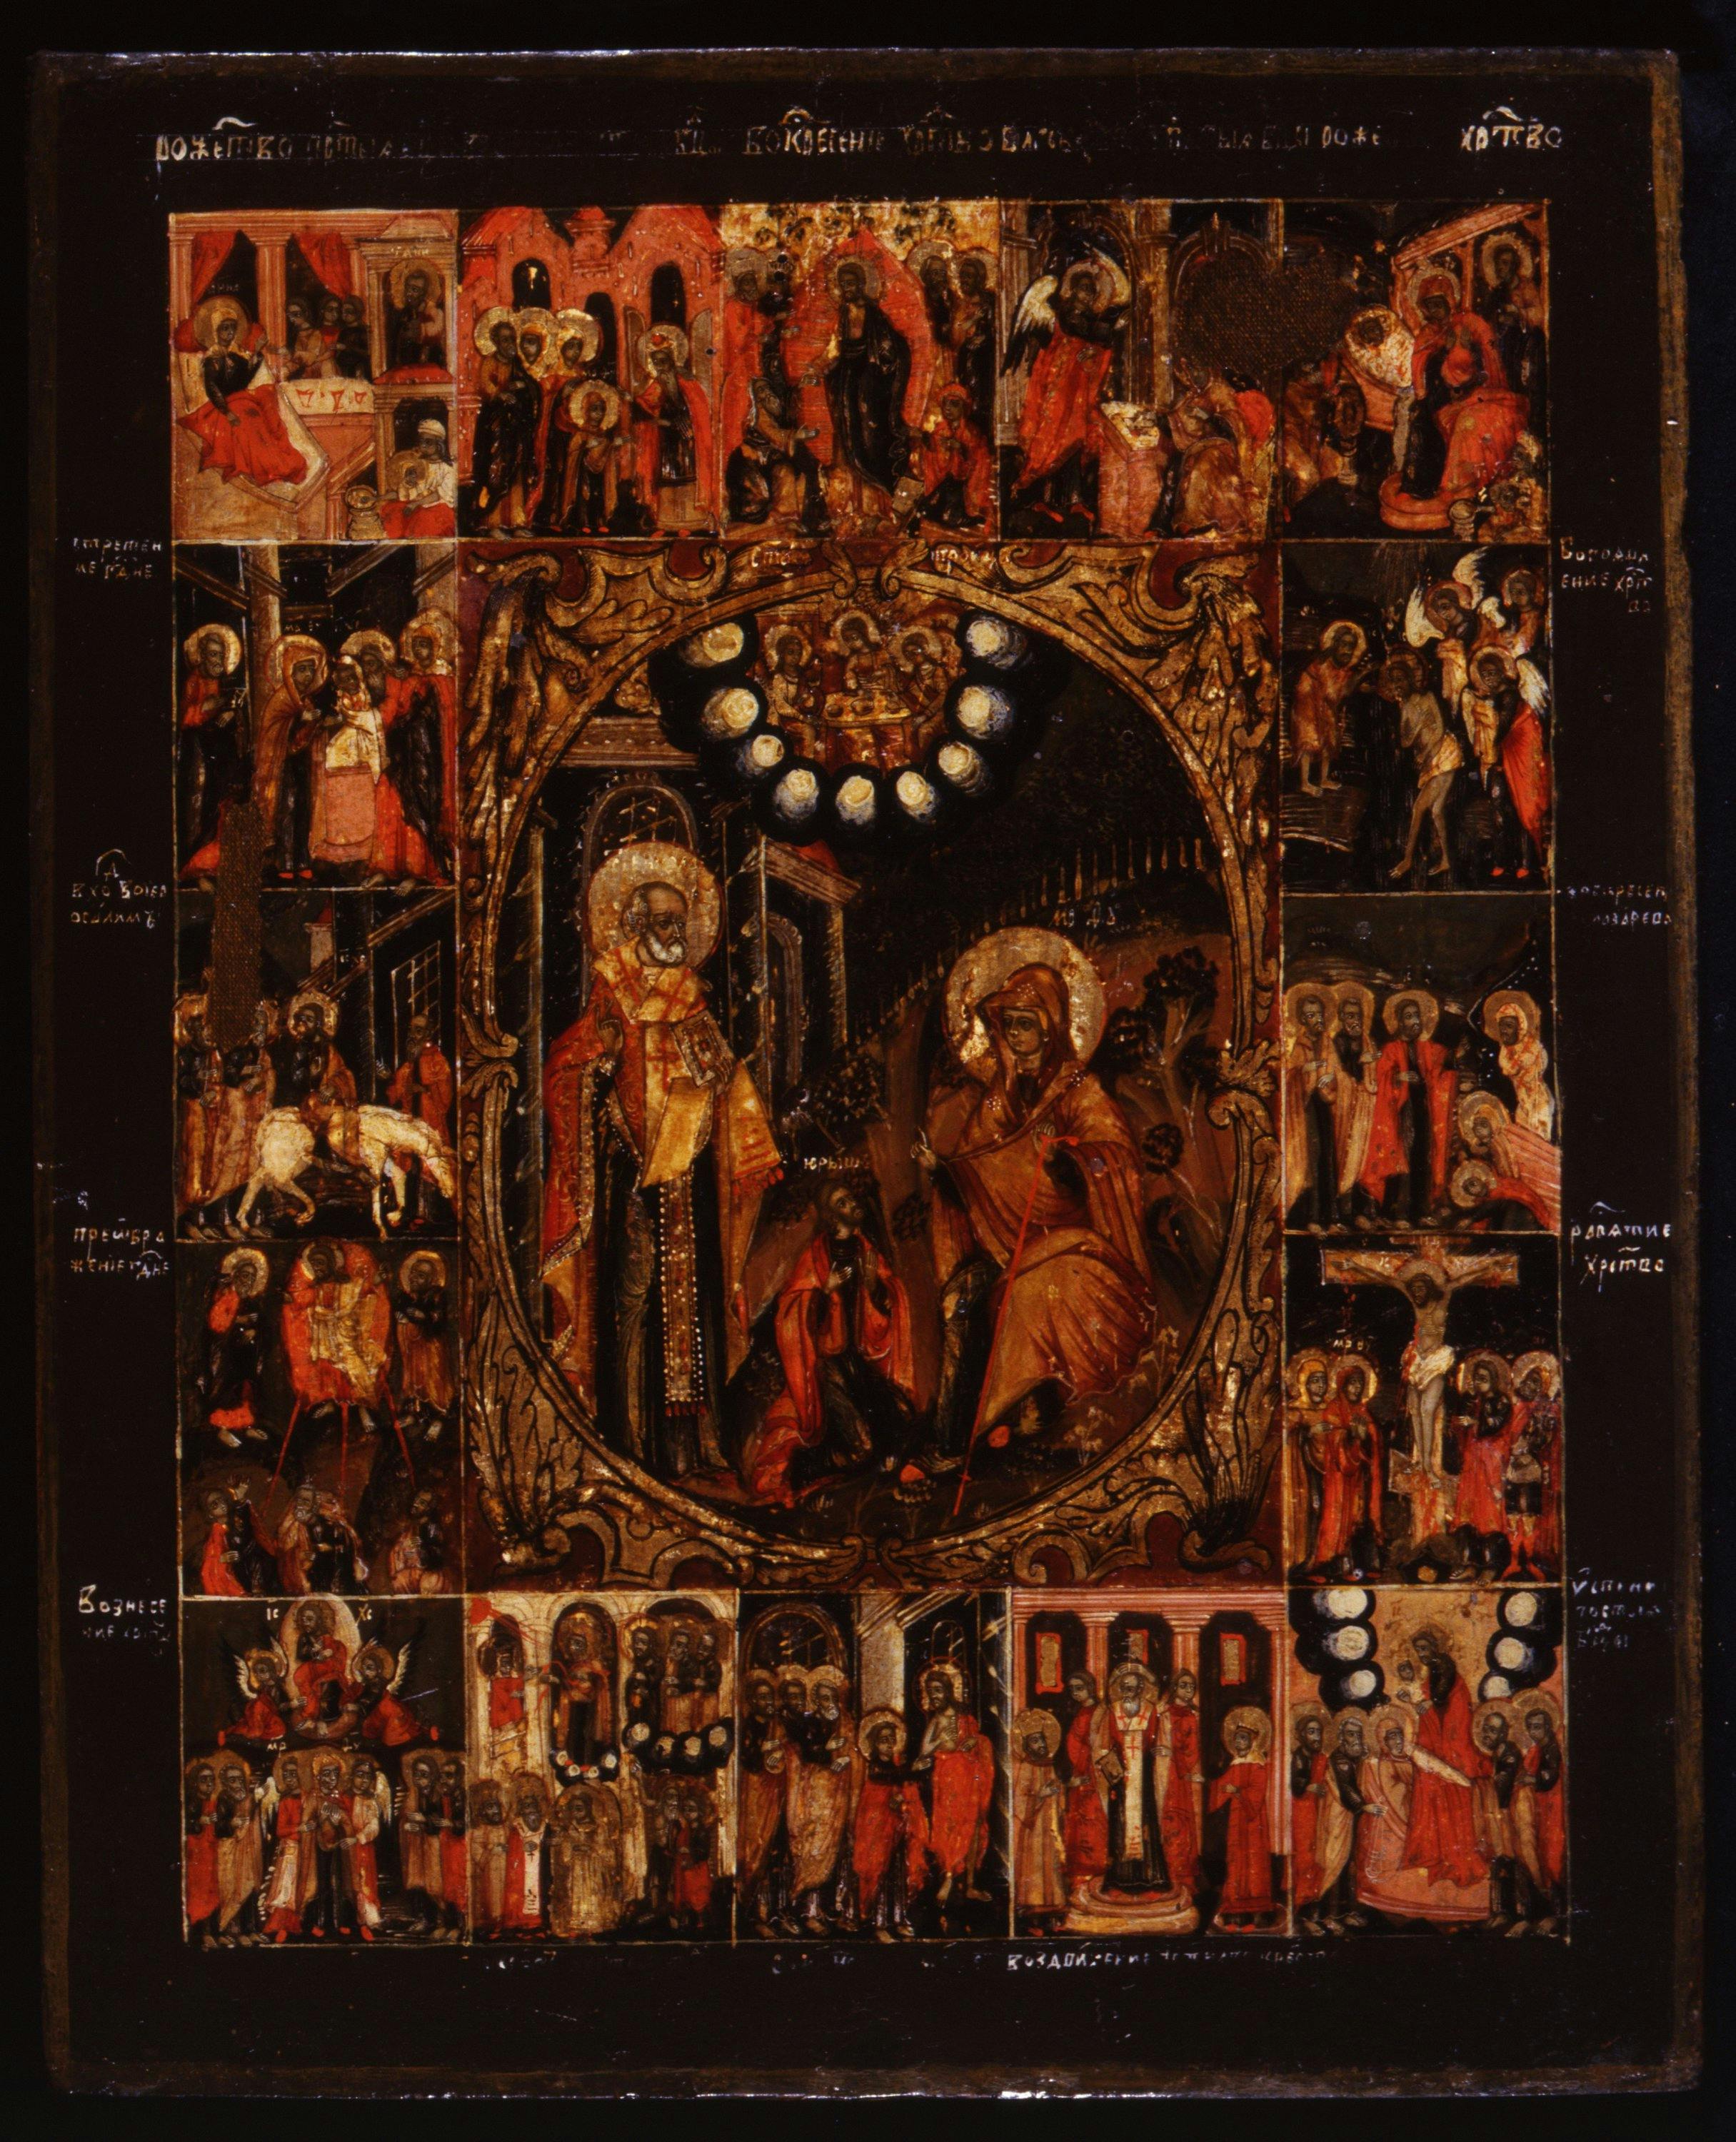 The Mother of God and St. Nicholas Converse with the Sacristan George, with scenes of the feast days